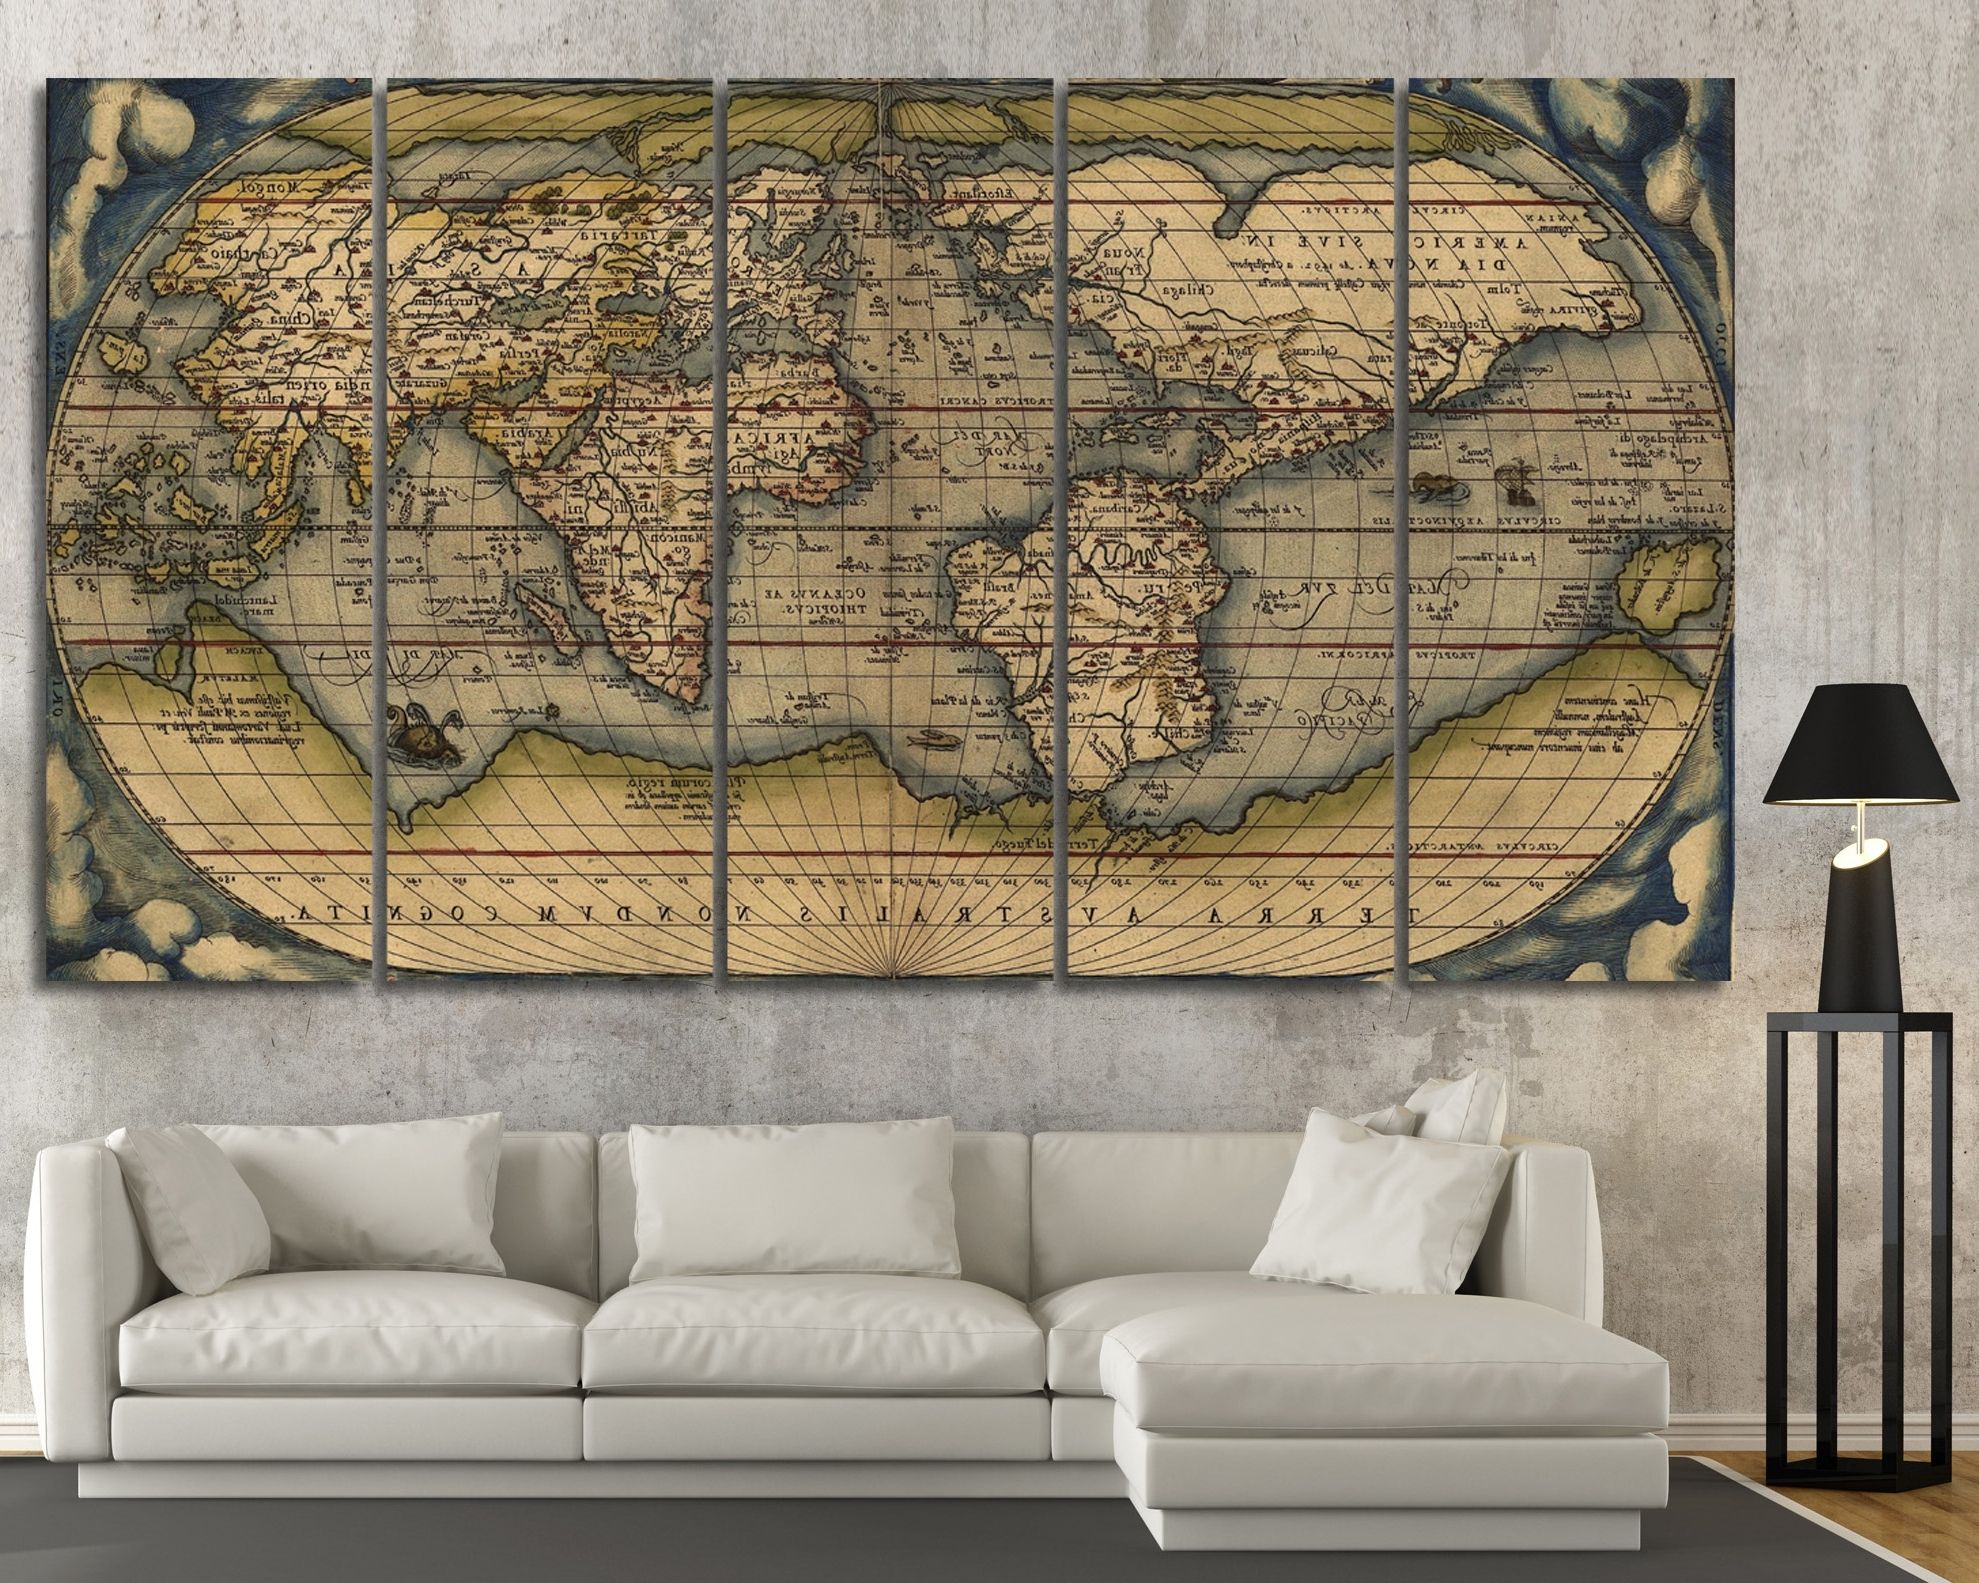 Old World Map Wall Art Within Most Popular Large Vintage Wall Art Old World Map At Texelprintart (View 1 of 15)